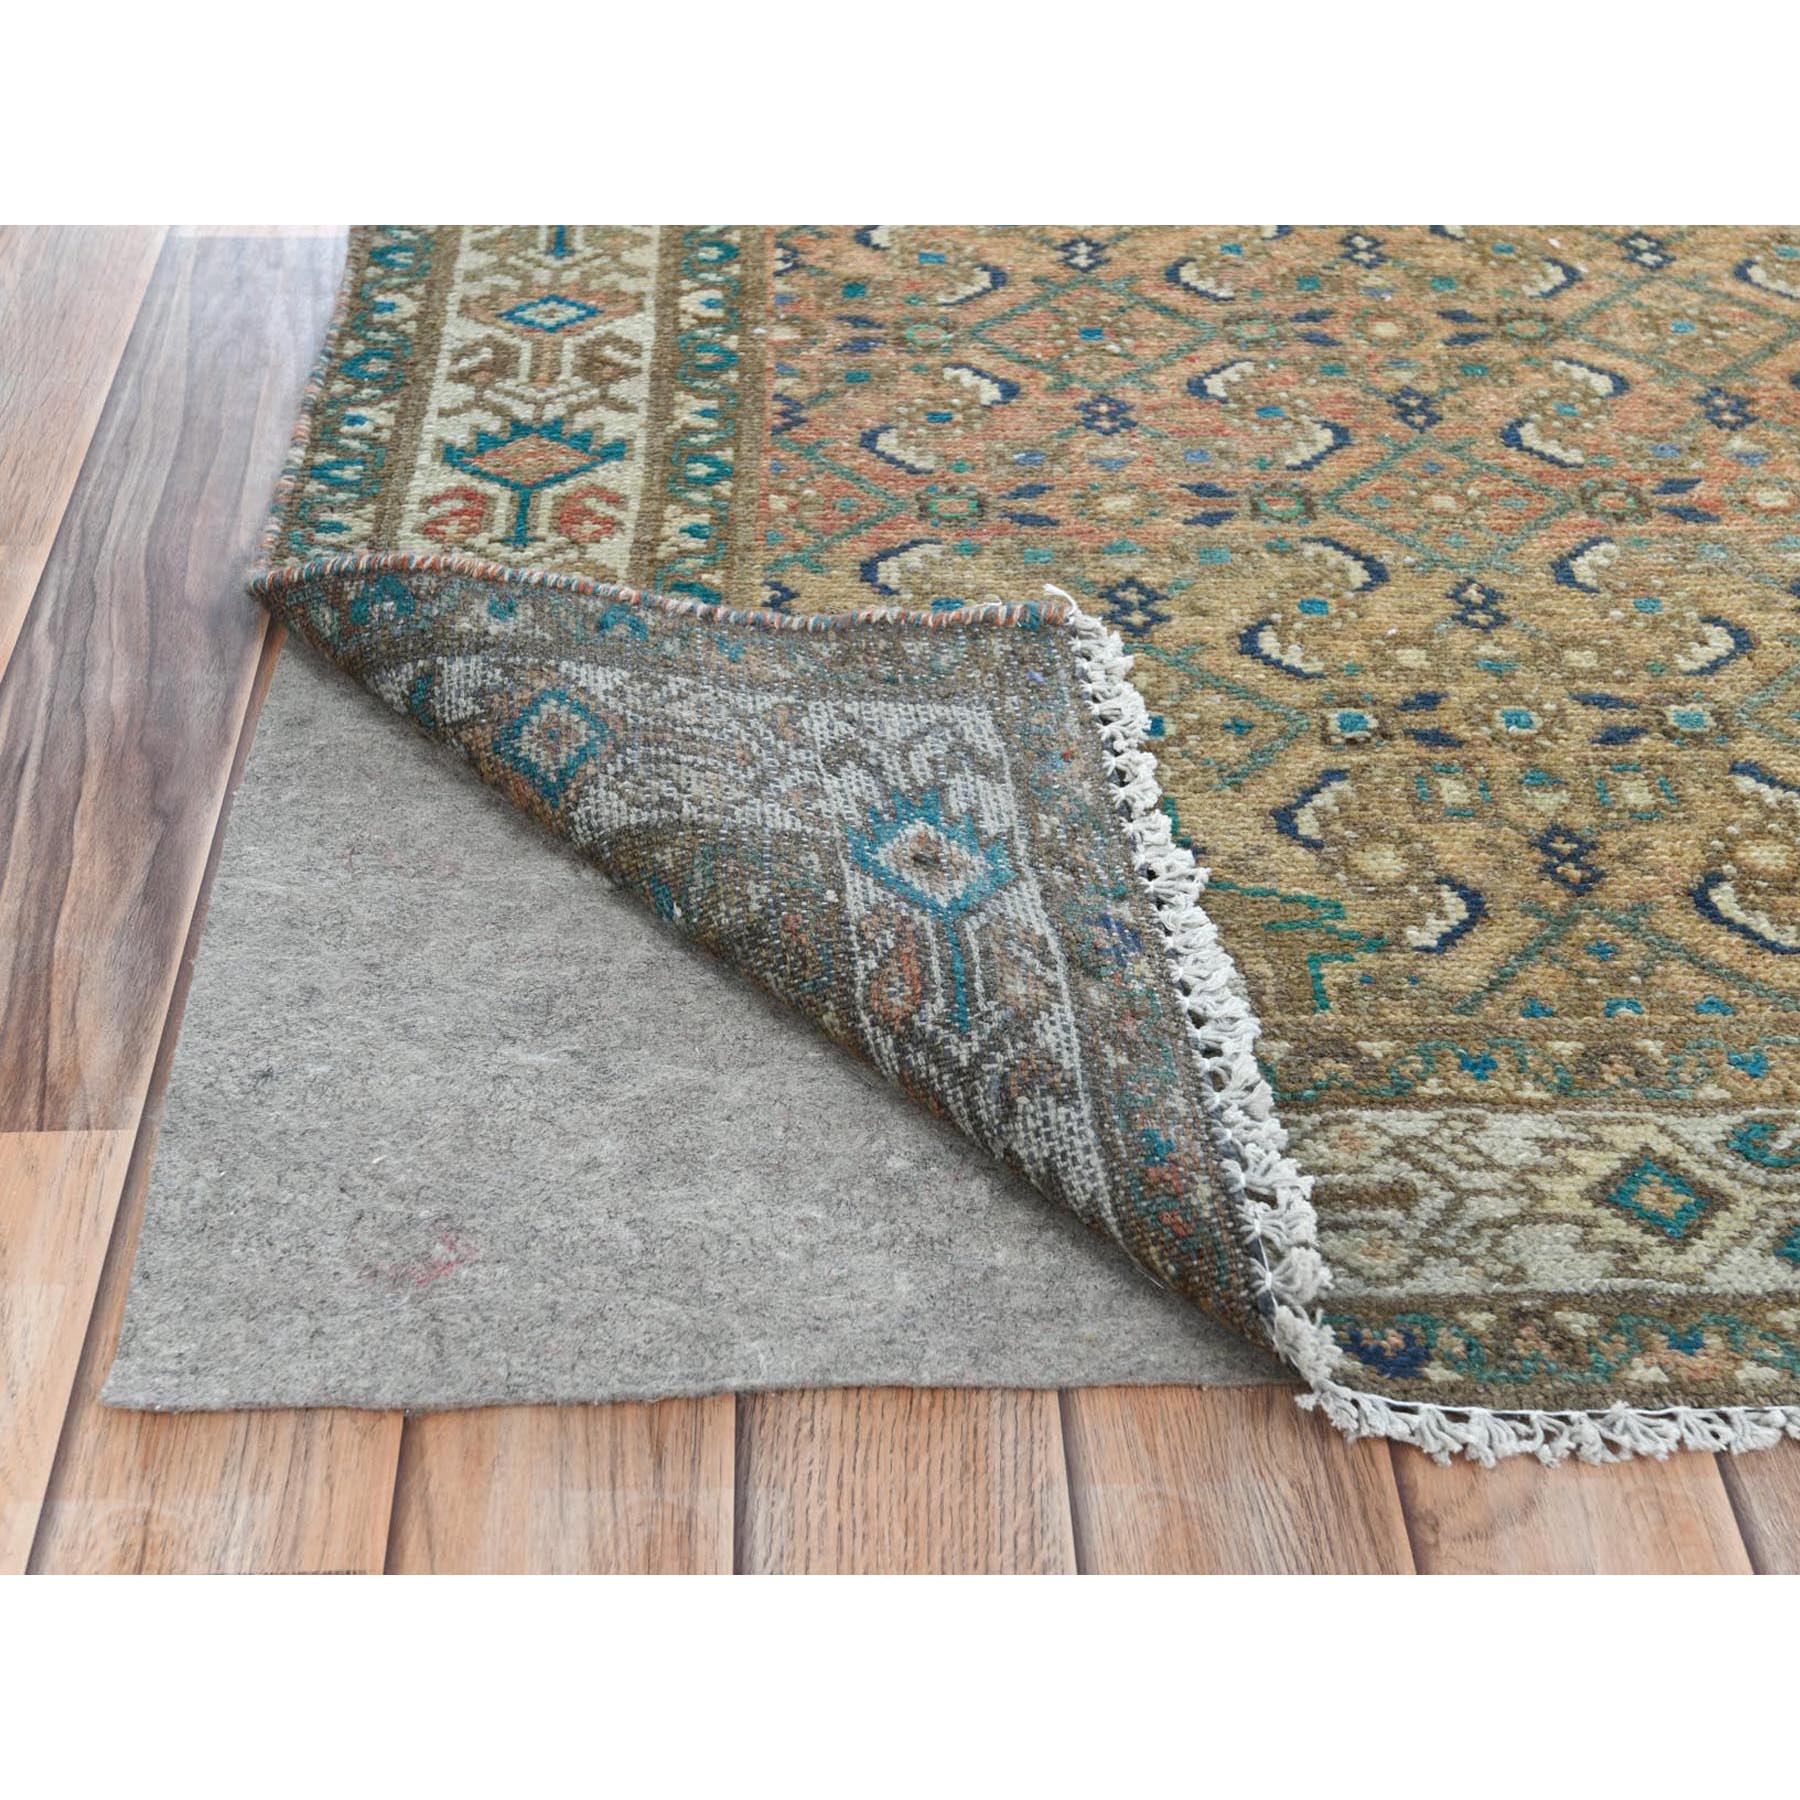 3'3"x9'2" Mocha Brown, Vintage Persian Hamadan with Fish Mahi Design, Abrash, Distressed, Cropped Thin, Hand Woven Pure Wool Wide Runner Oriental Rug 